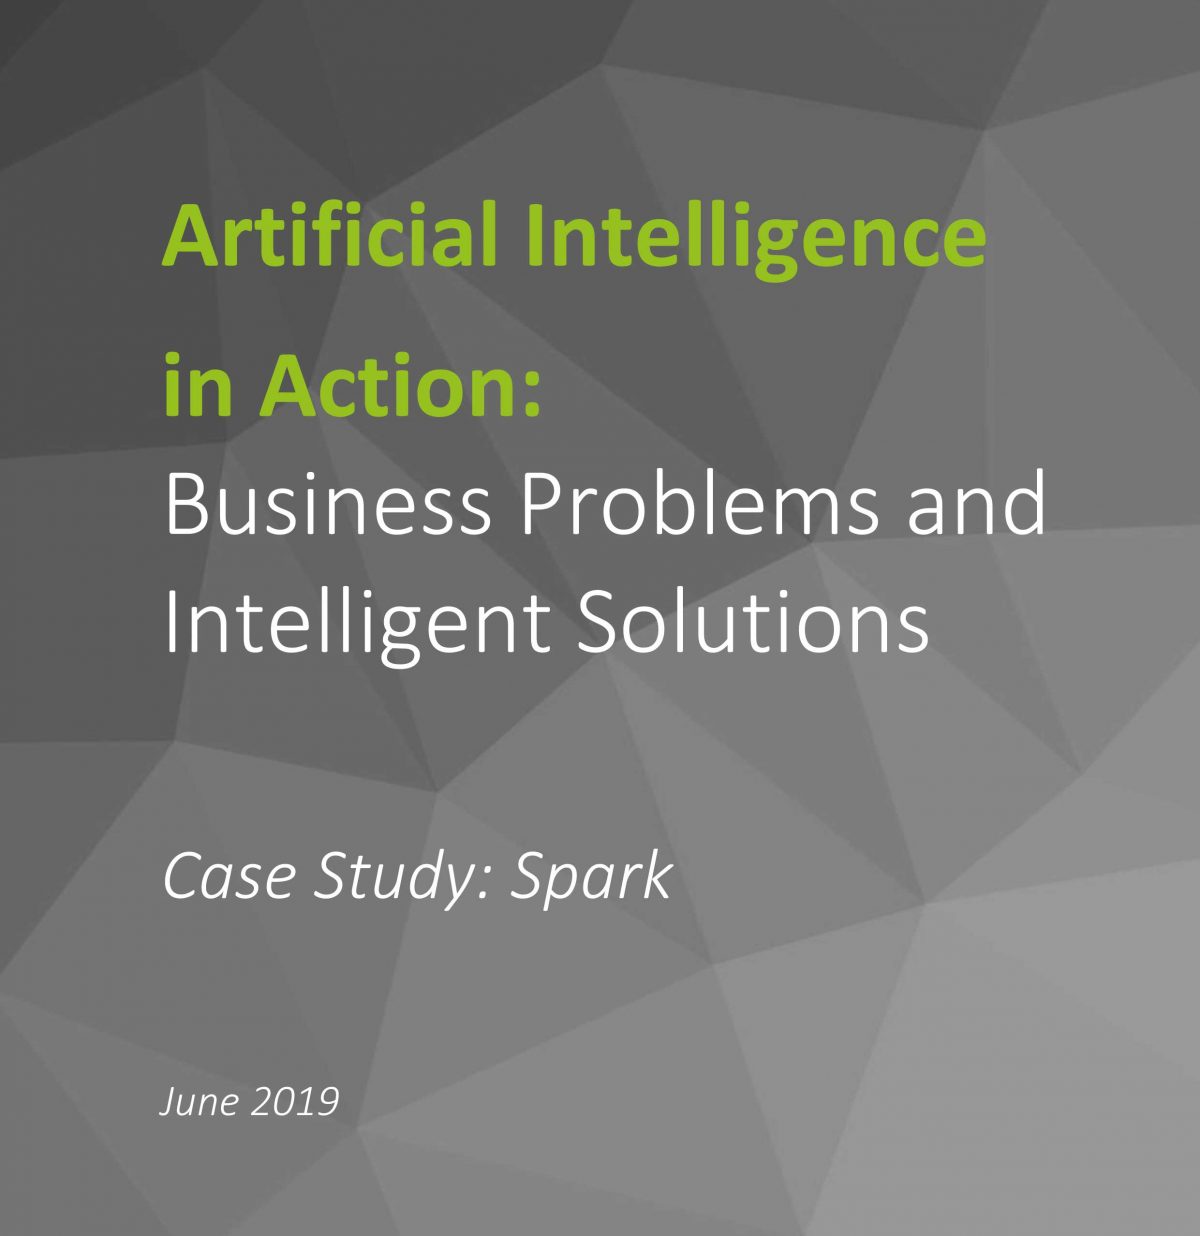 Artificial Intelligence in Action: Business Problems and Intelligent Solutions